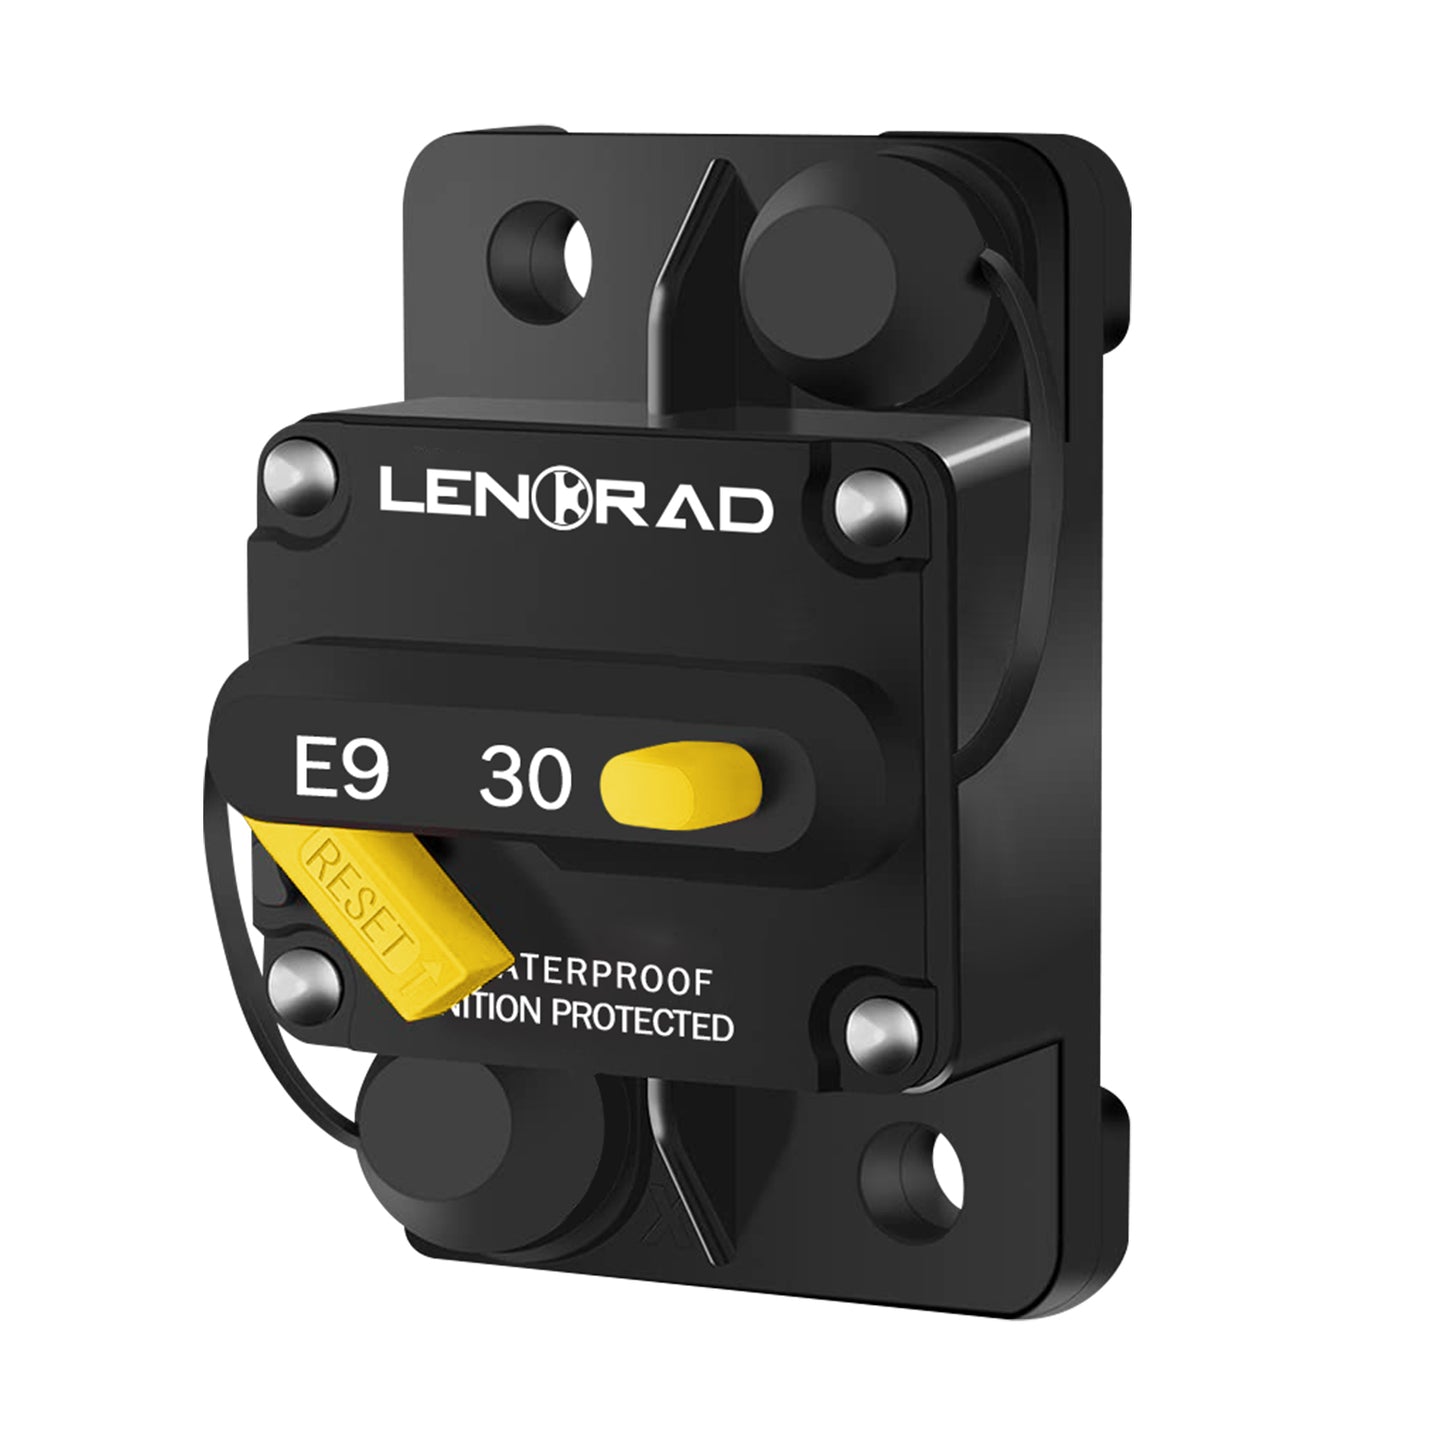 LENKRAD 30 Amp Circuit Breaker 12V with Manual Reset Switch Button for Boat Marine RV Yacht, Boat Circuit Breakers 12V - 48V DC, Waterproof(Surface Mount) - THALASSA